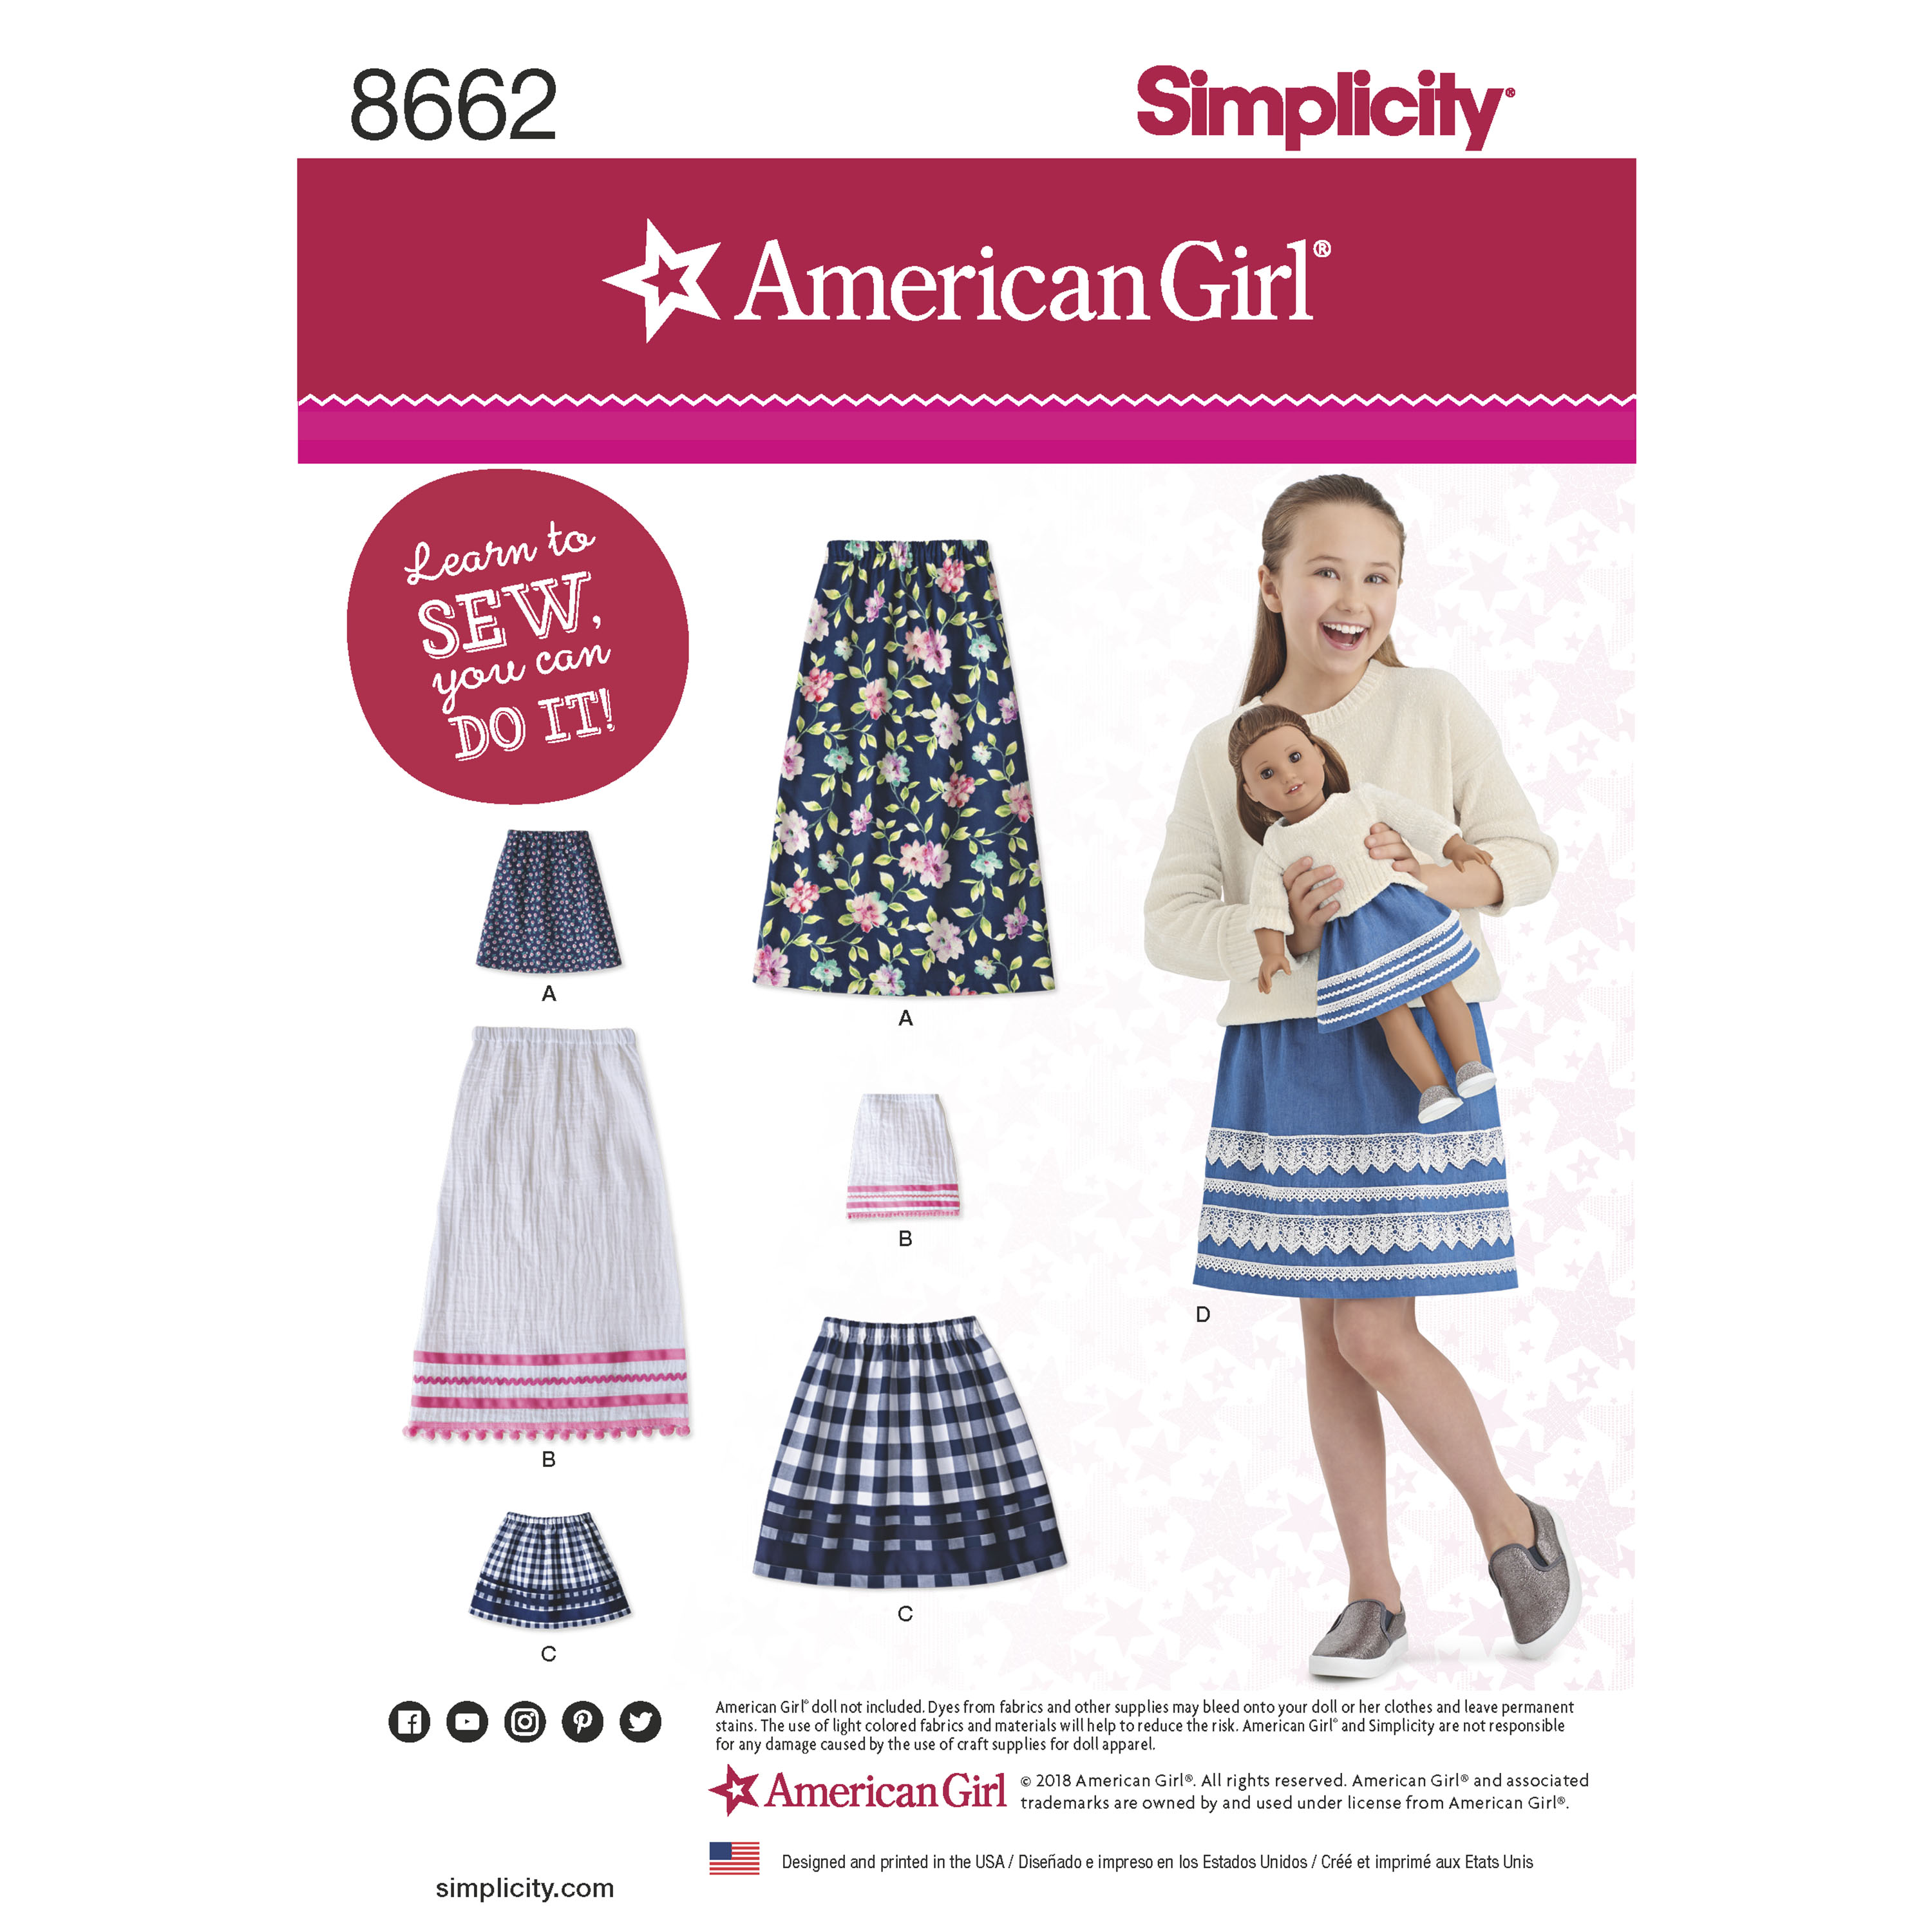 Simplicity 8662 Dress Pattern Review